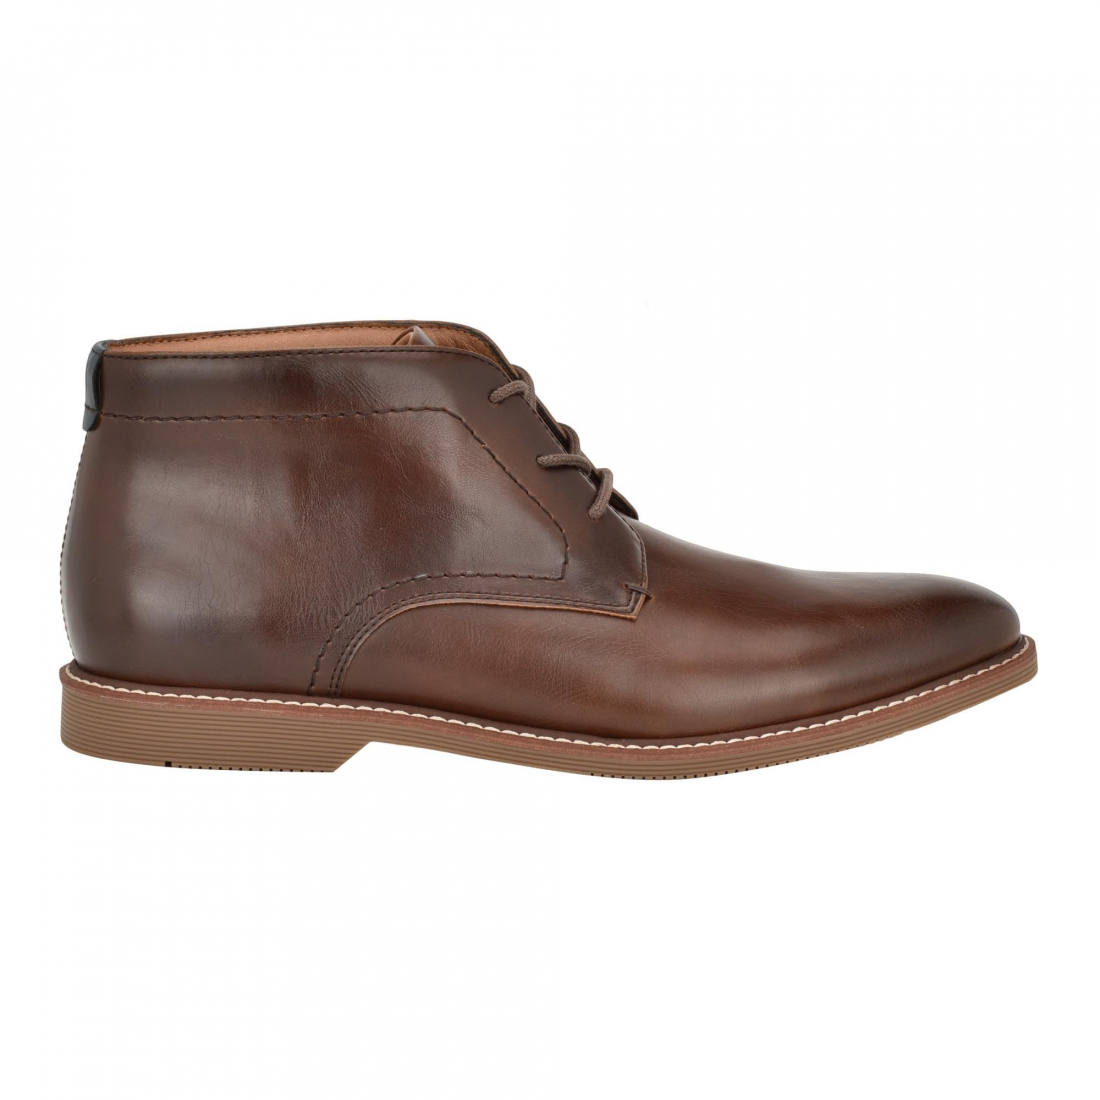 Men's 'Rosell' Ankle Boots